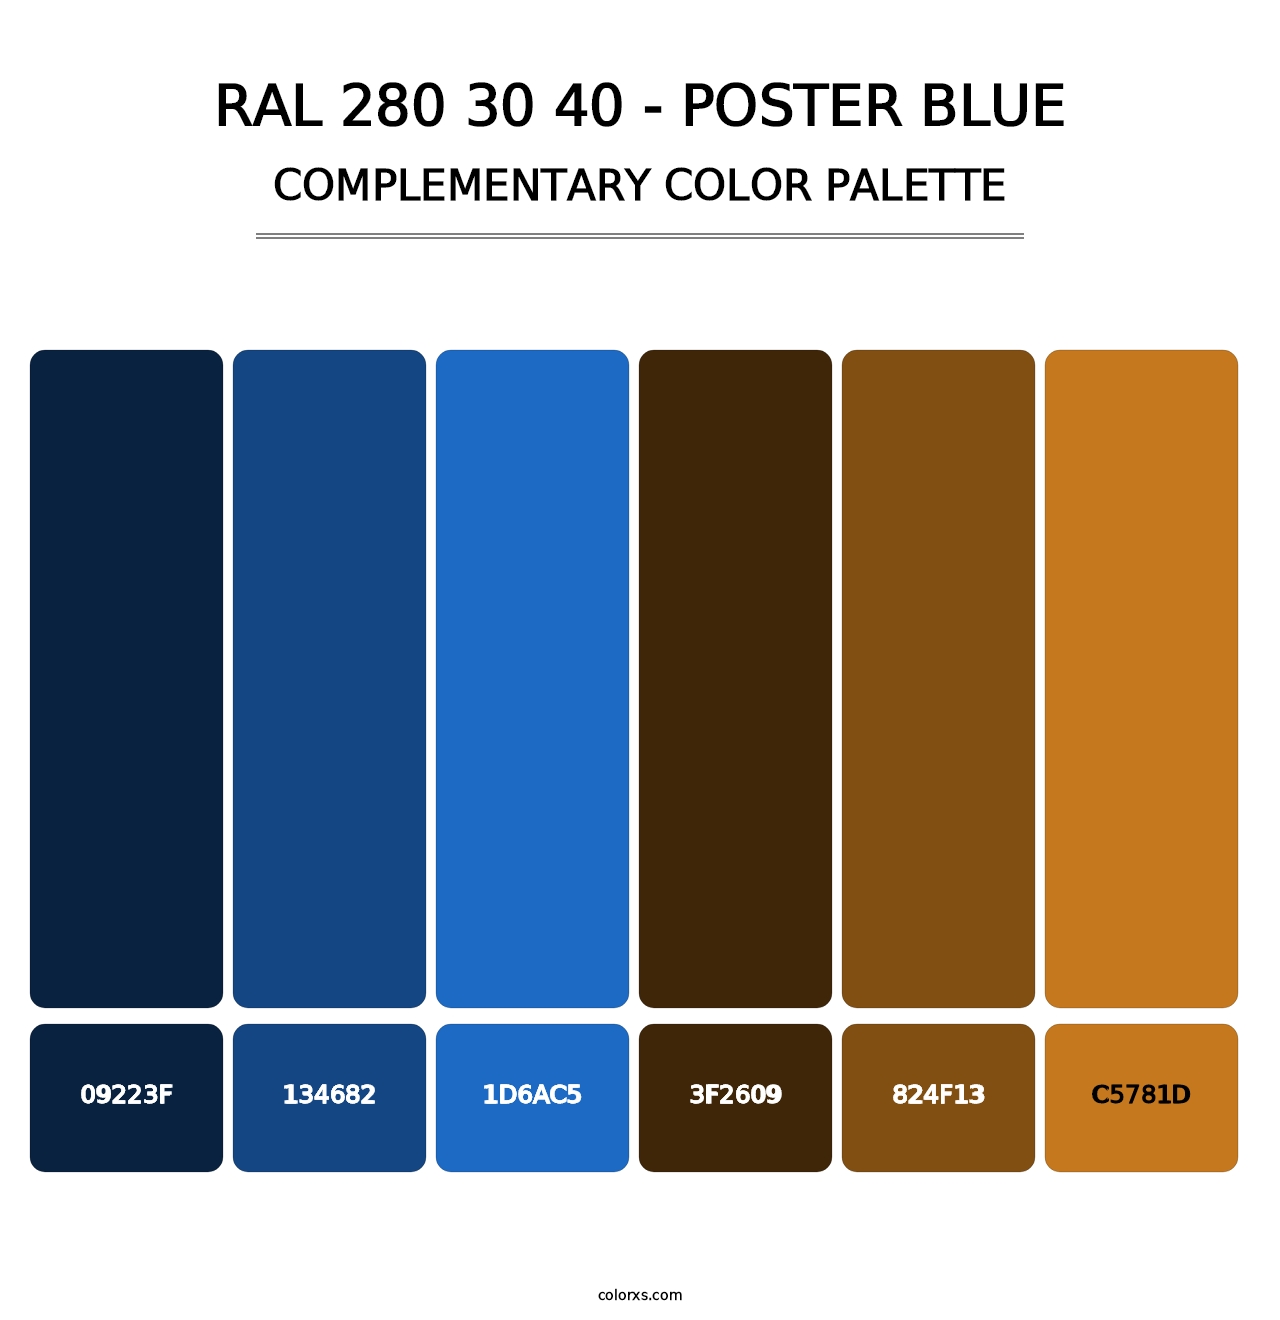 RAL 280 30 40 - Poster Blue - Complementary Color Palette